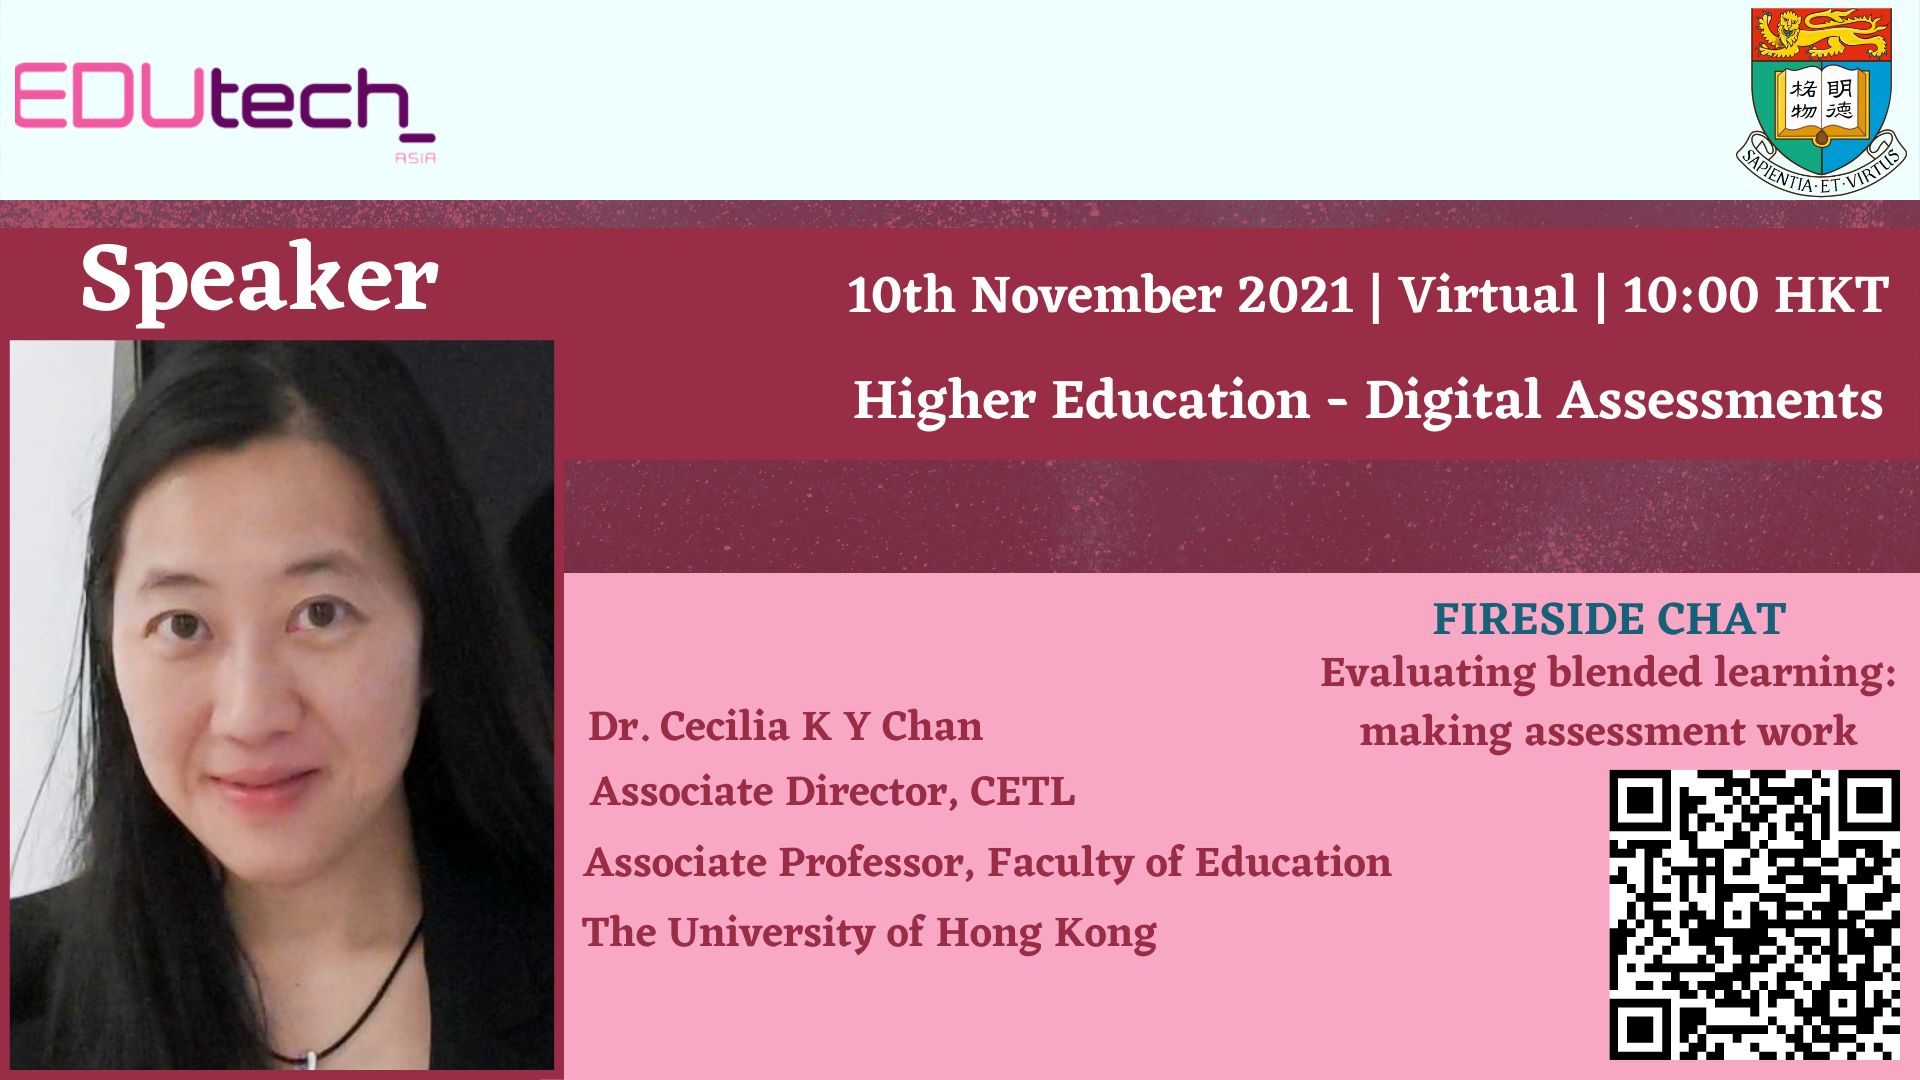 10th November 2021  - Dr. Cecilia Chan has been invited by EDUtech Asia to speak on 